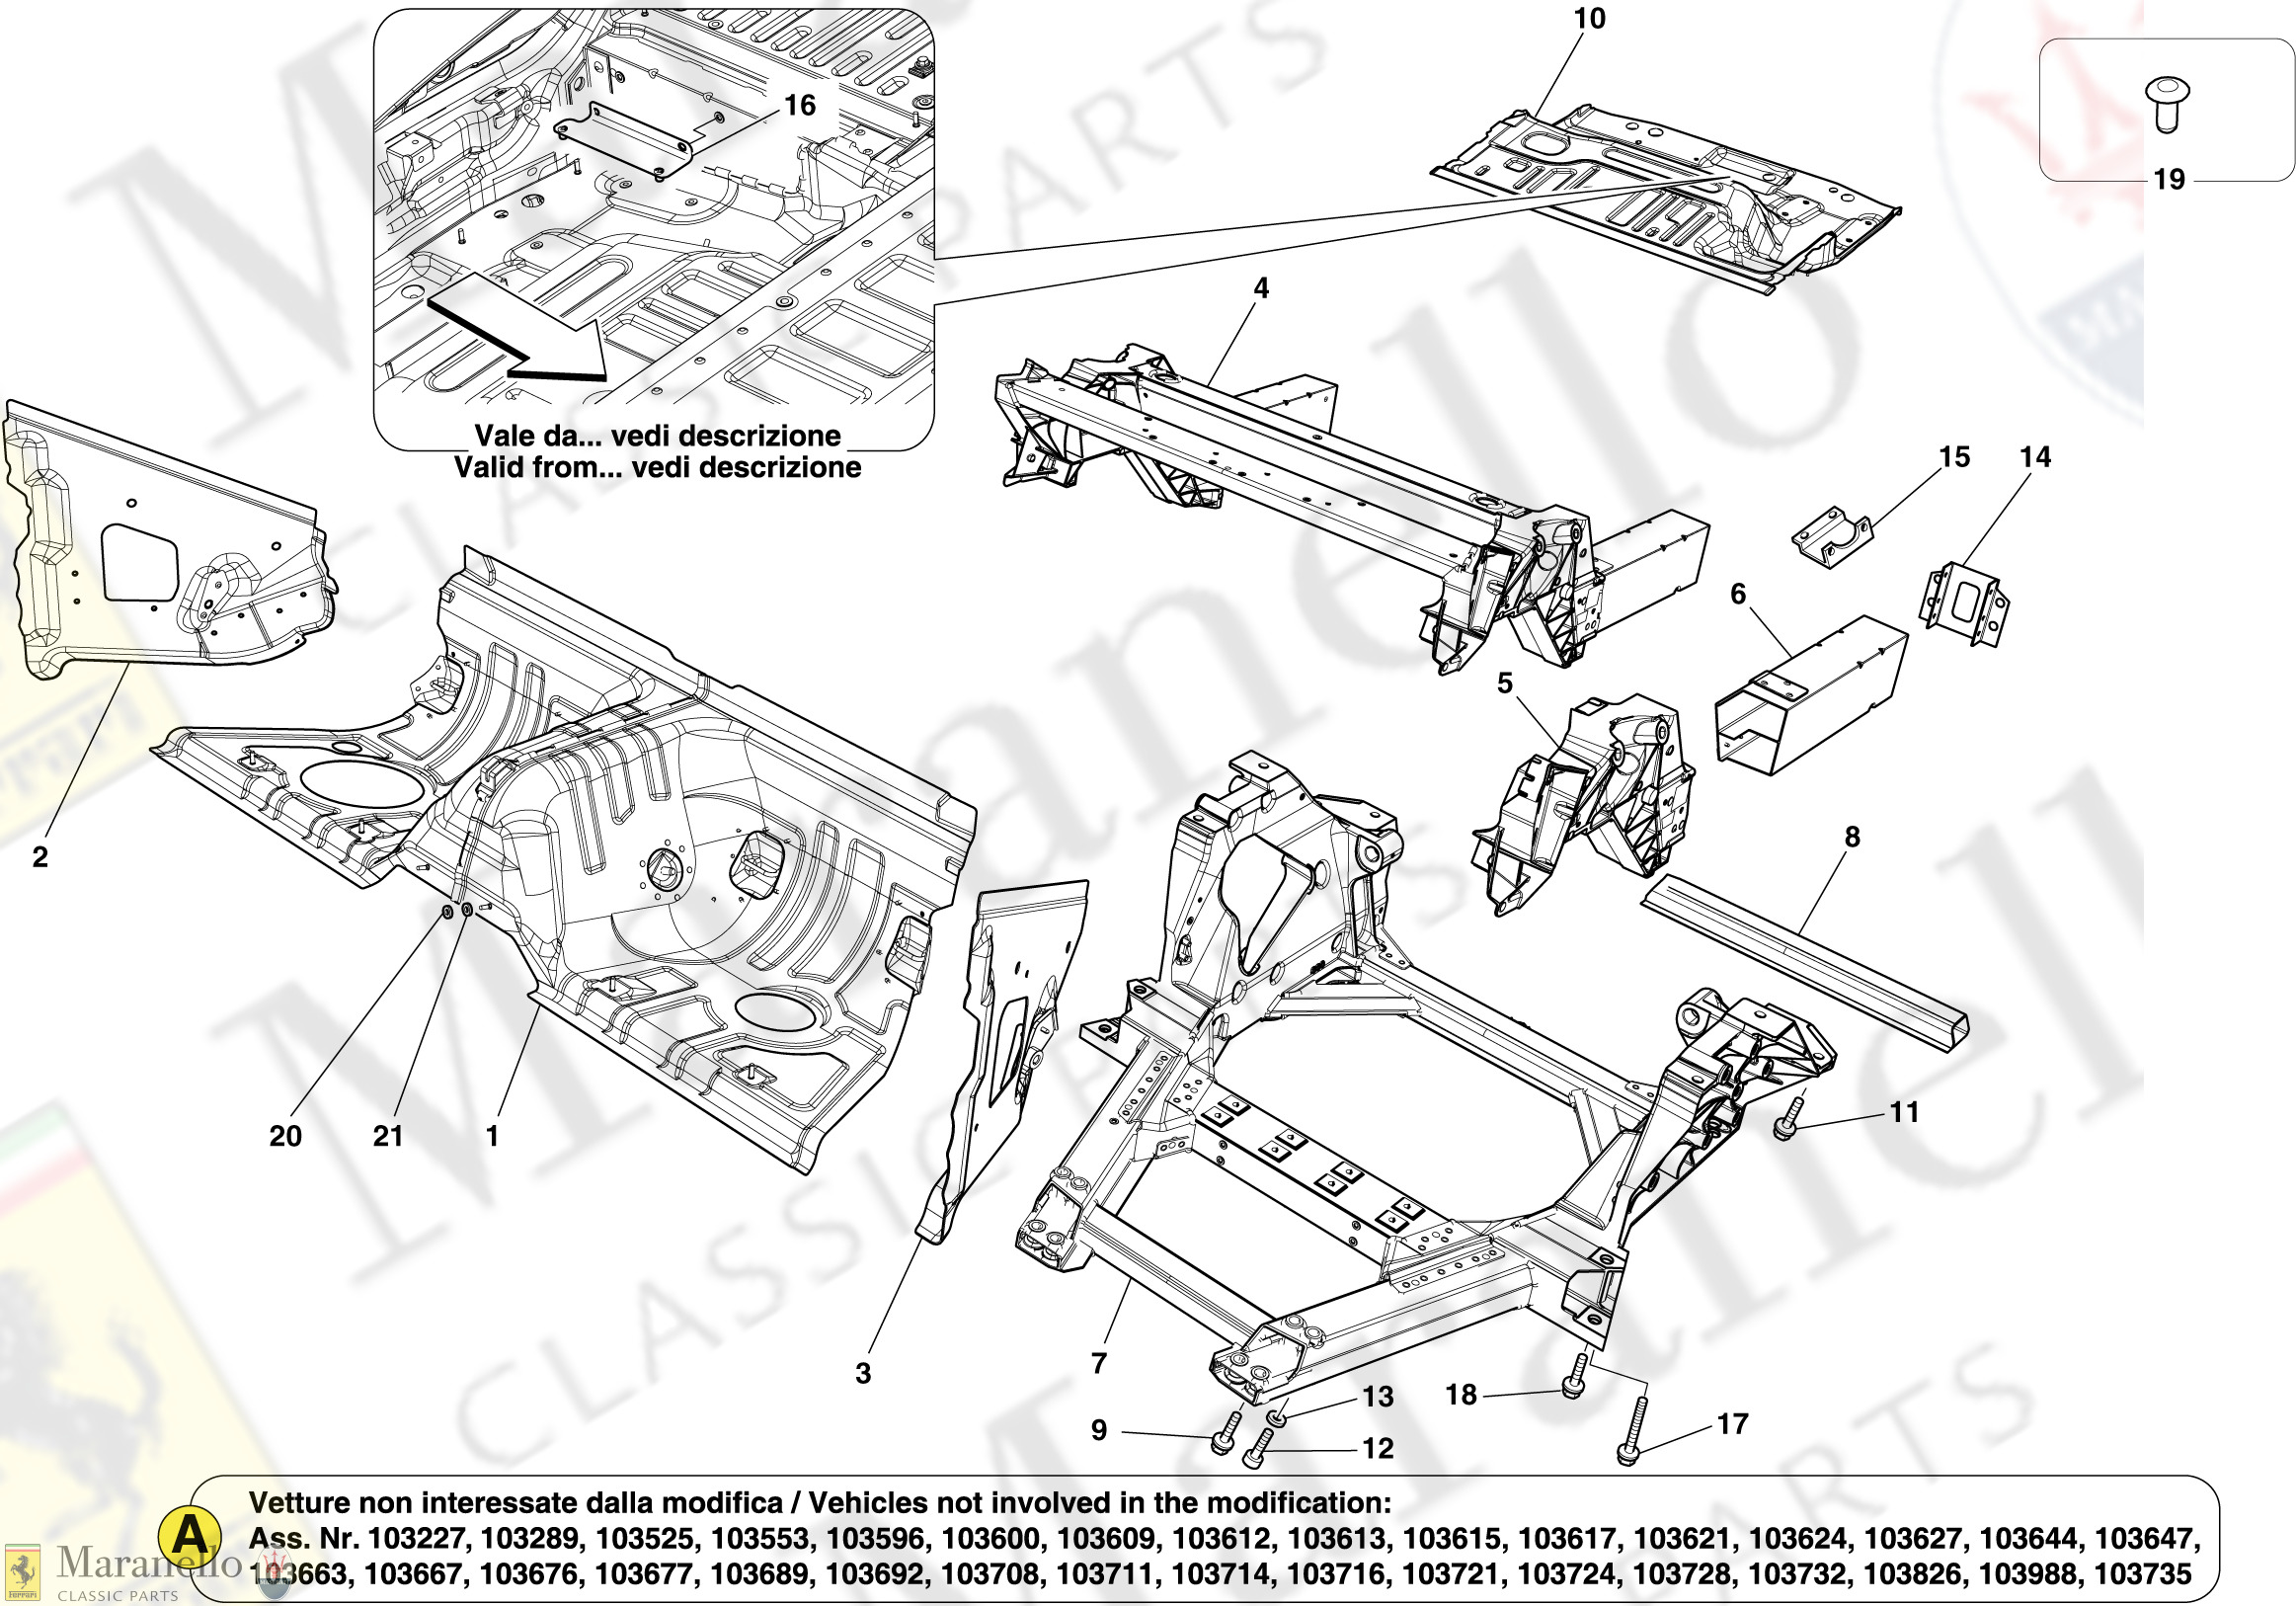 111 - REAR STRUCTURES AND CHASSIS BOX SECTIONS -Applicable from Ass.ly No. 103179 (see note A for excluded Ass.ly Numbers)-